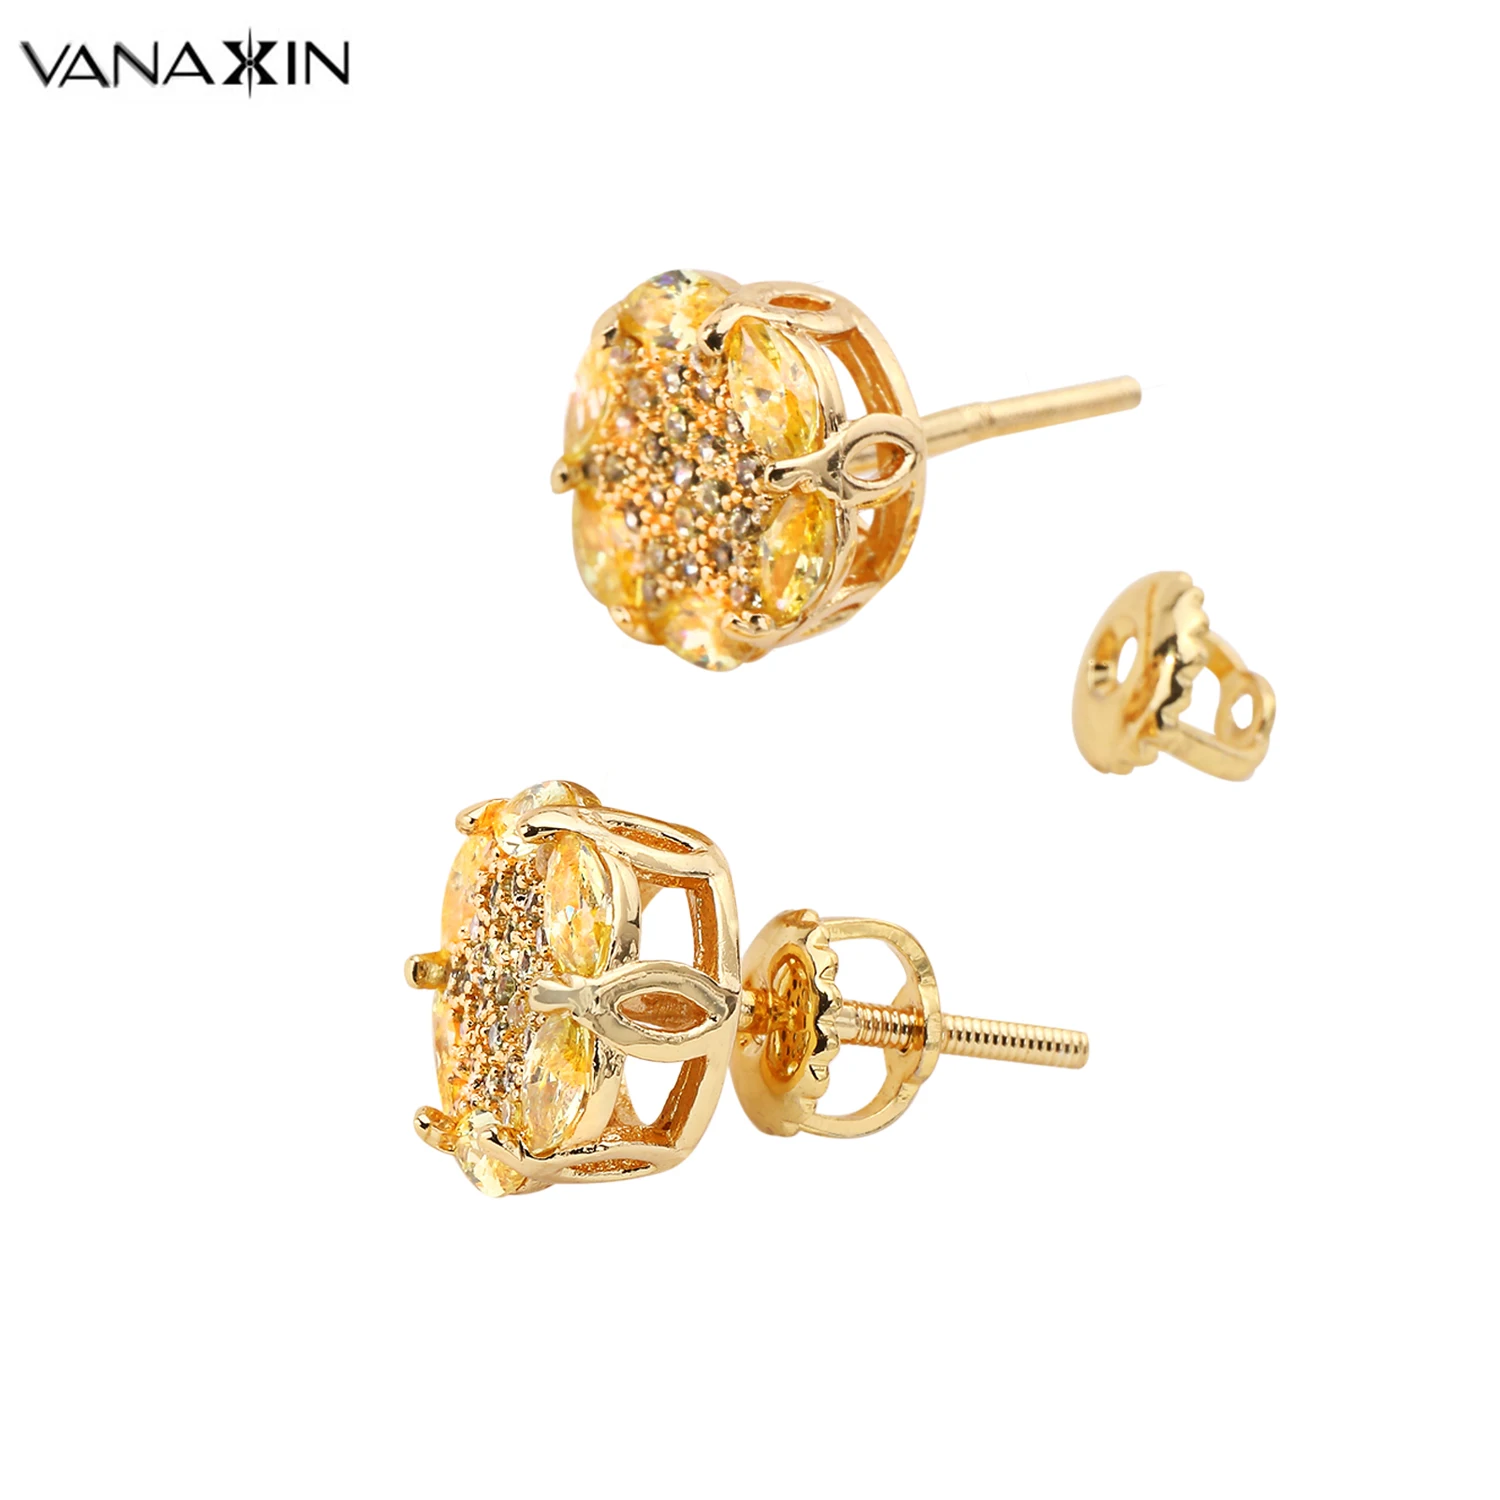 

VANAXIN Flower CZ Shiny Earrings For Women Brincos Gold Black Silver Color Copper Punk Earings Fashion Jewelry Boucle D'oreille